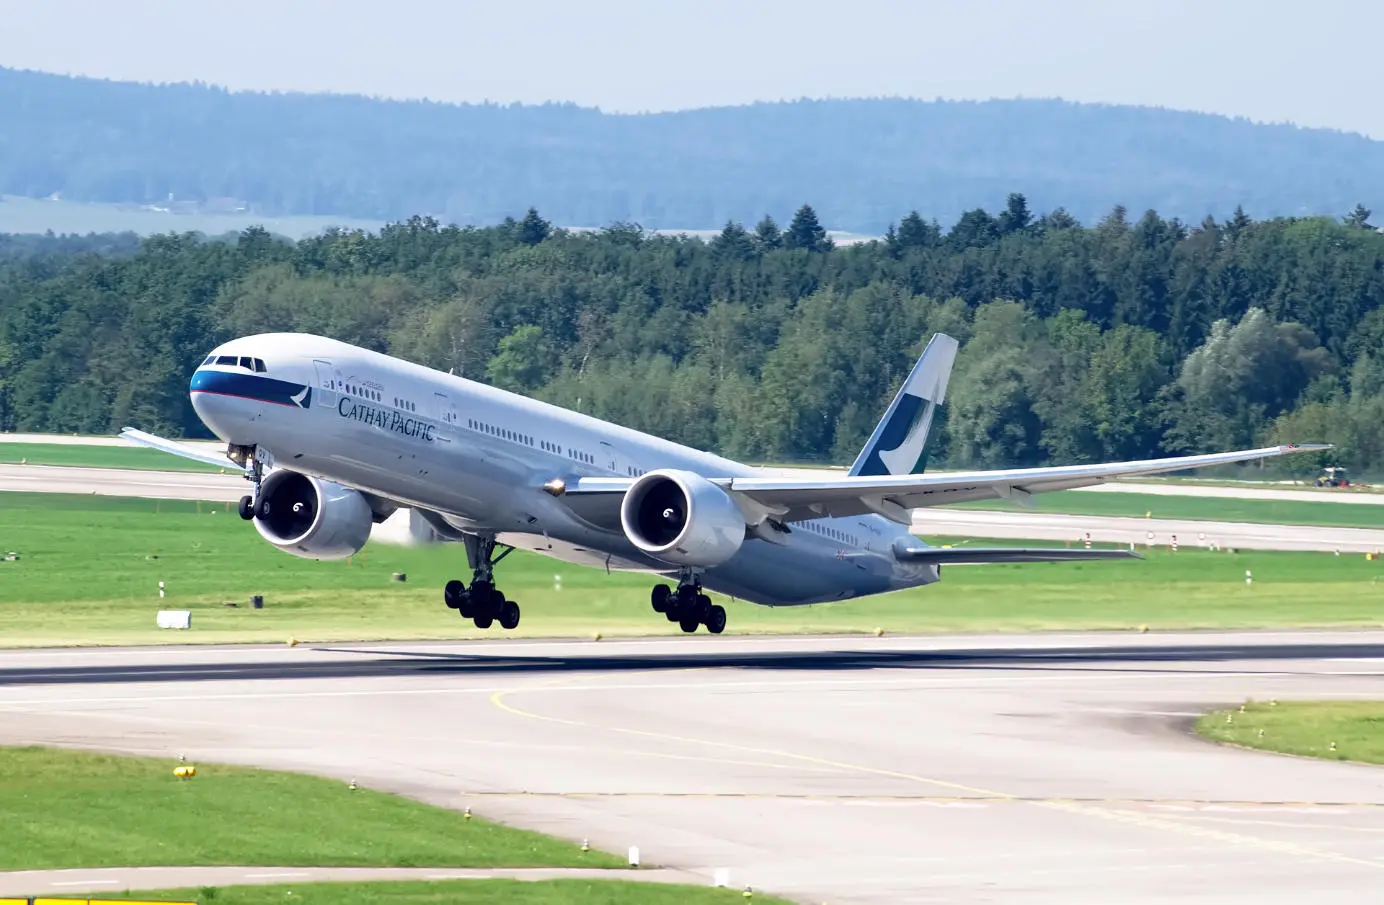 The Boeing 777 can carry between 312-388 passengers